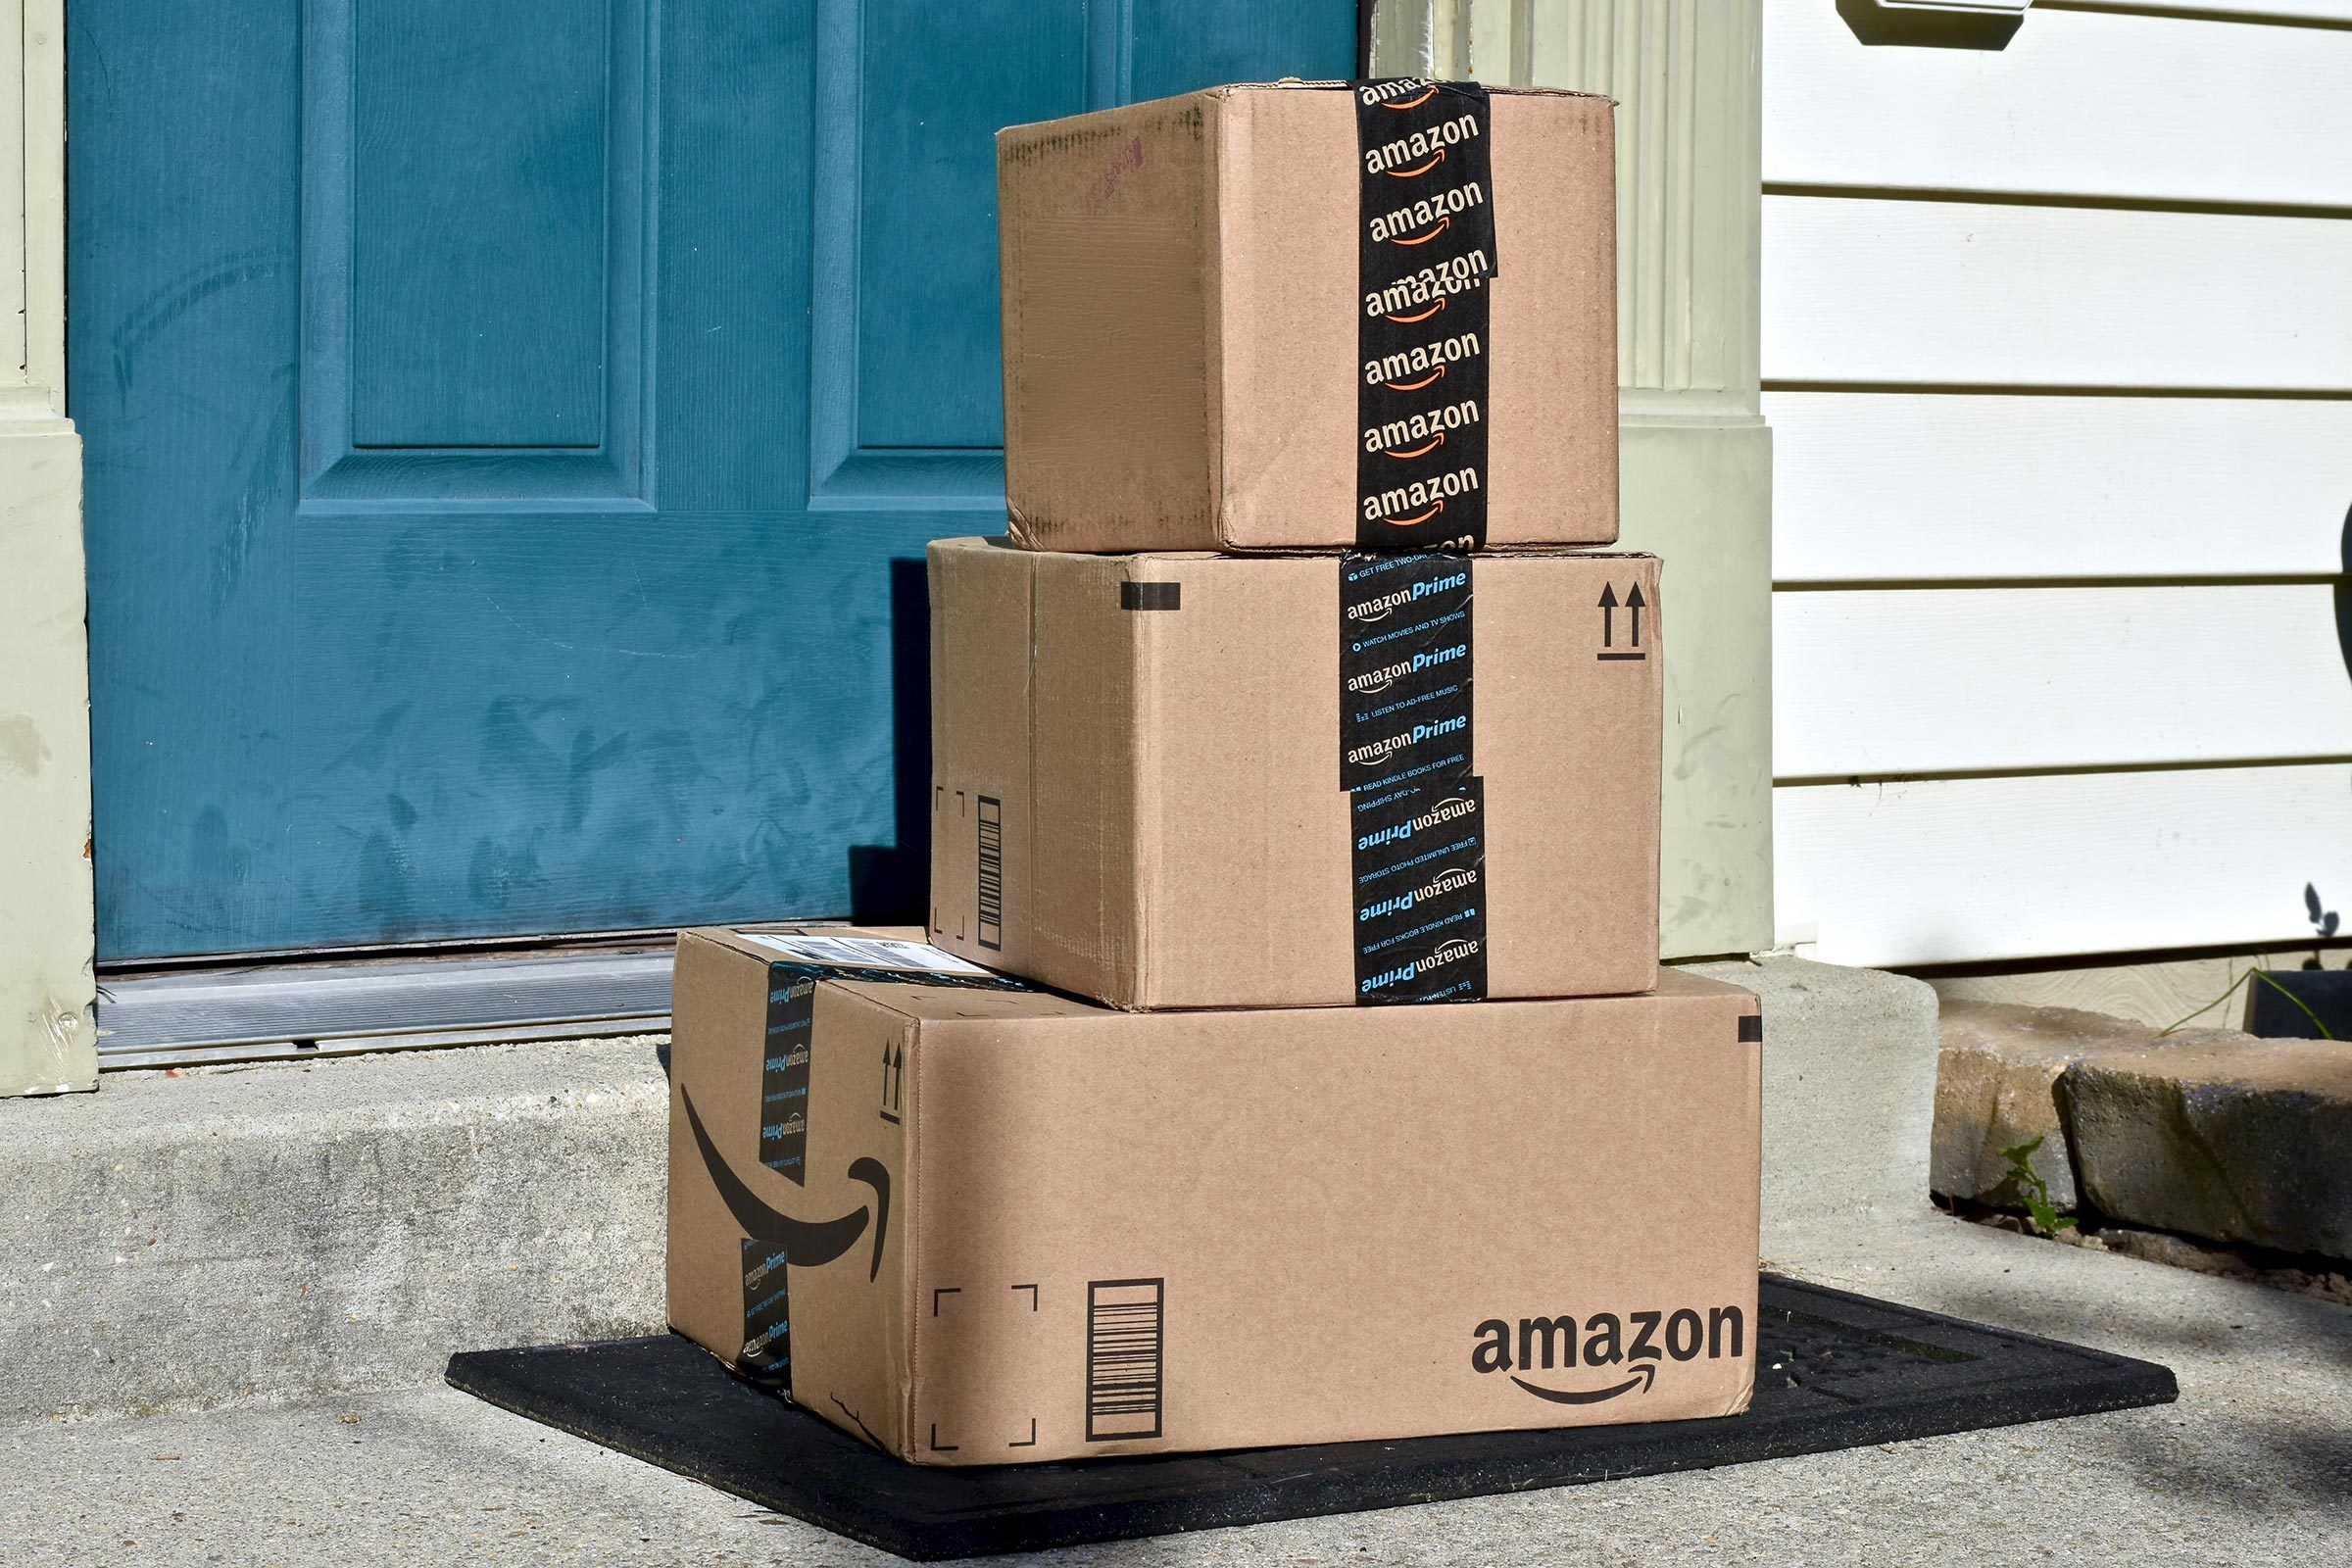 Prime Day 2.0 Is Launching Tomorrow to Give Your Holiday Shopping a  Jumpstart